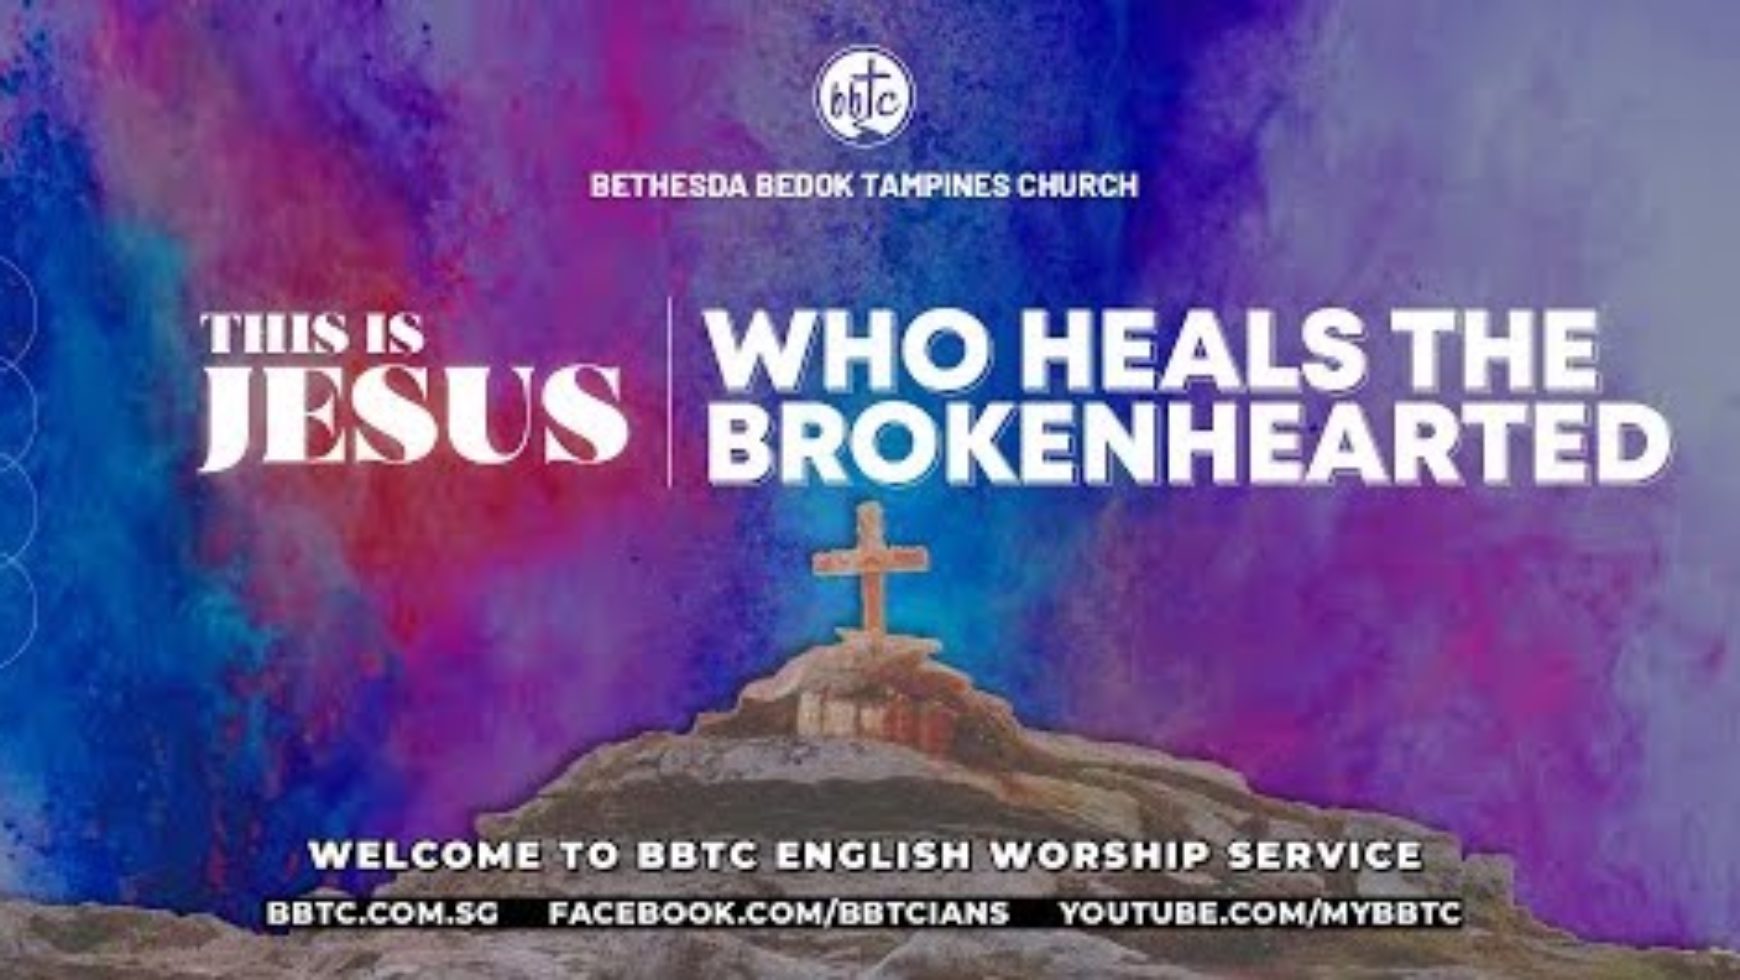 THIS IS JESUS WHO HEALS THE BROKEN HEARTED